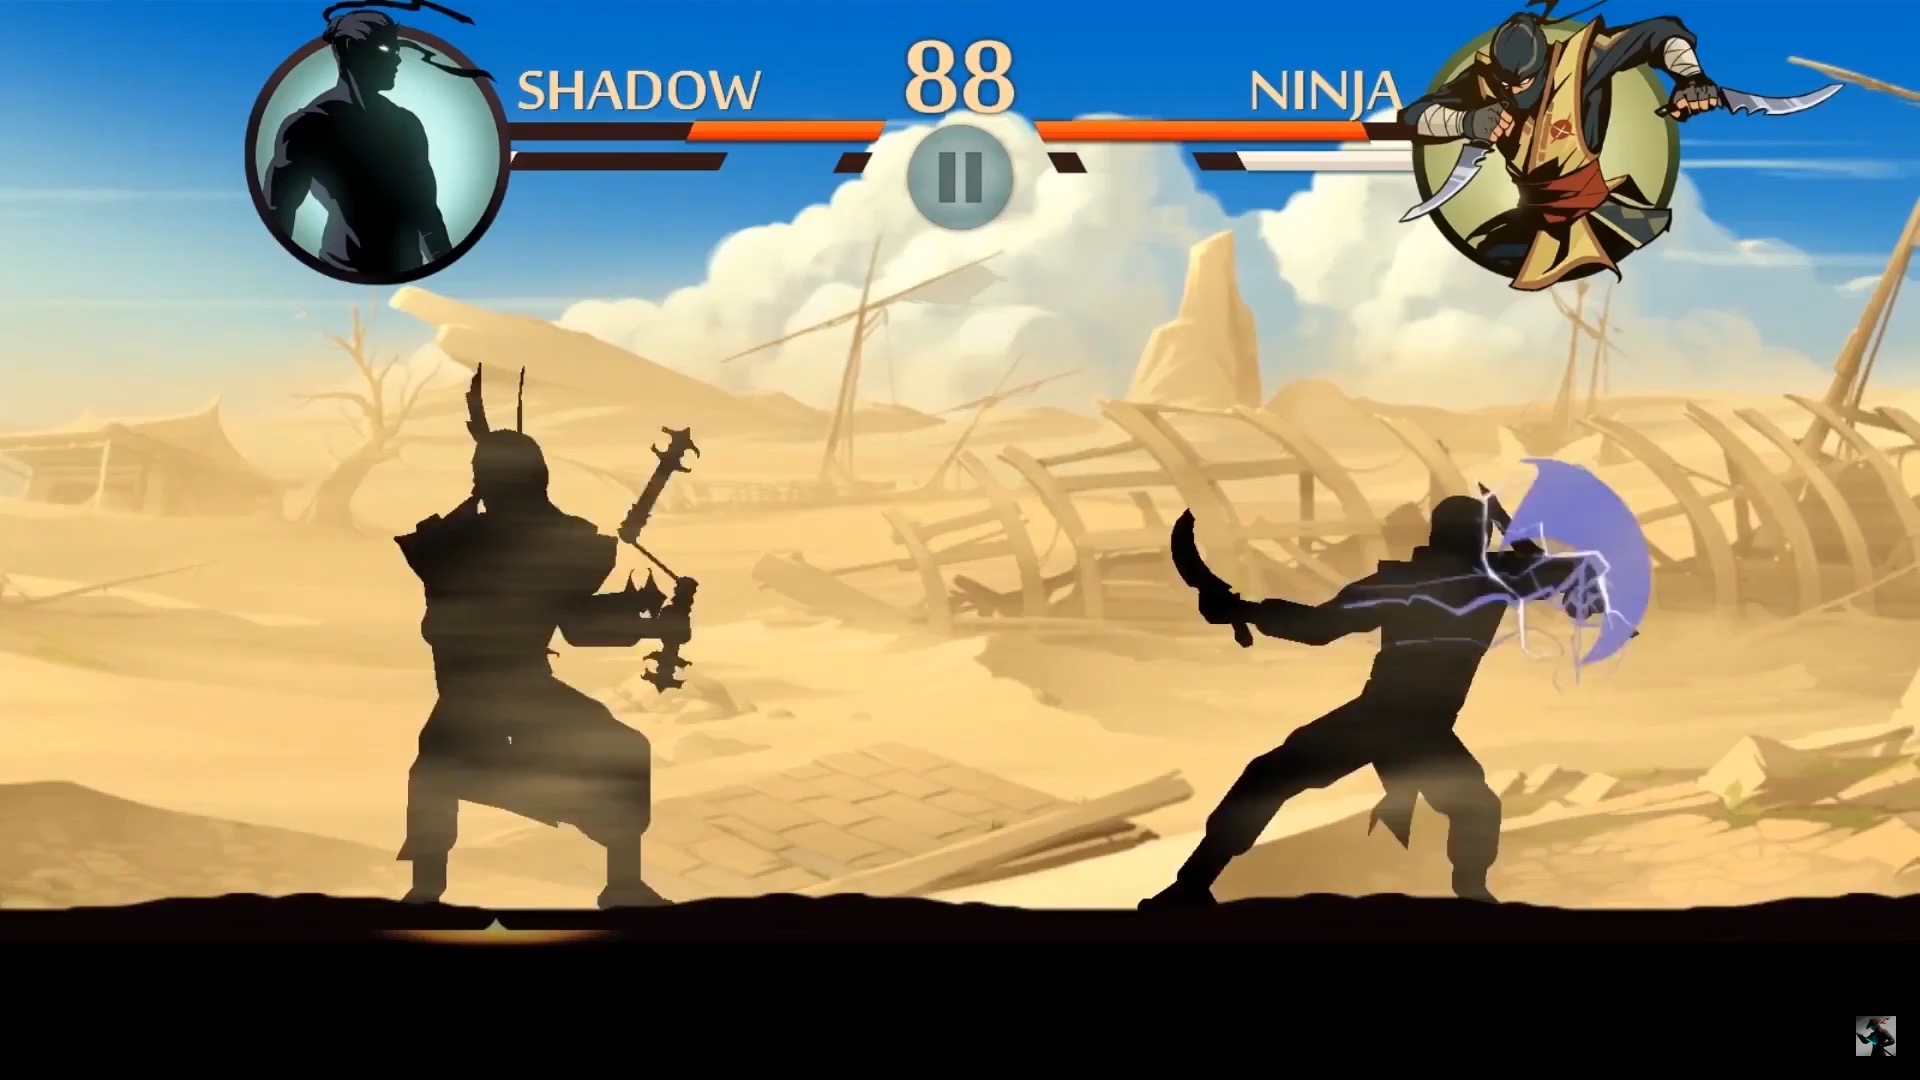 Shadow fight 2 кэш. Shadow Fight 2 Shadow. Тень из игры Shadow Fight 2. Тень из Шедоу файт 2. Шадоу файт 2 Special Edition.